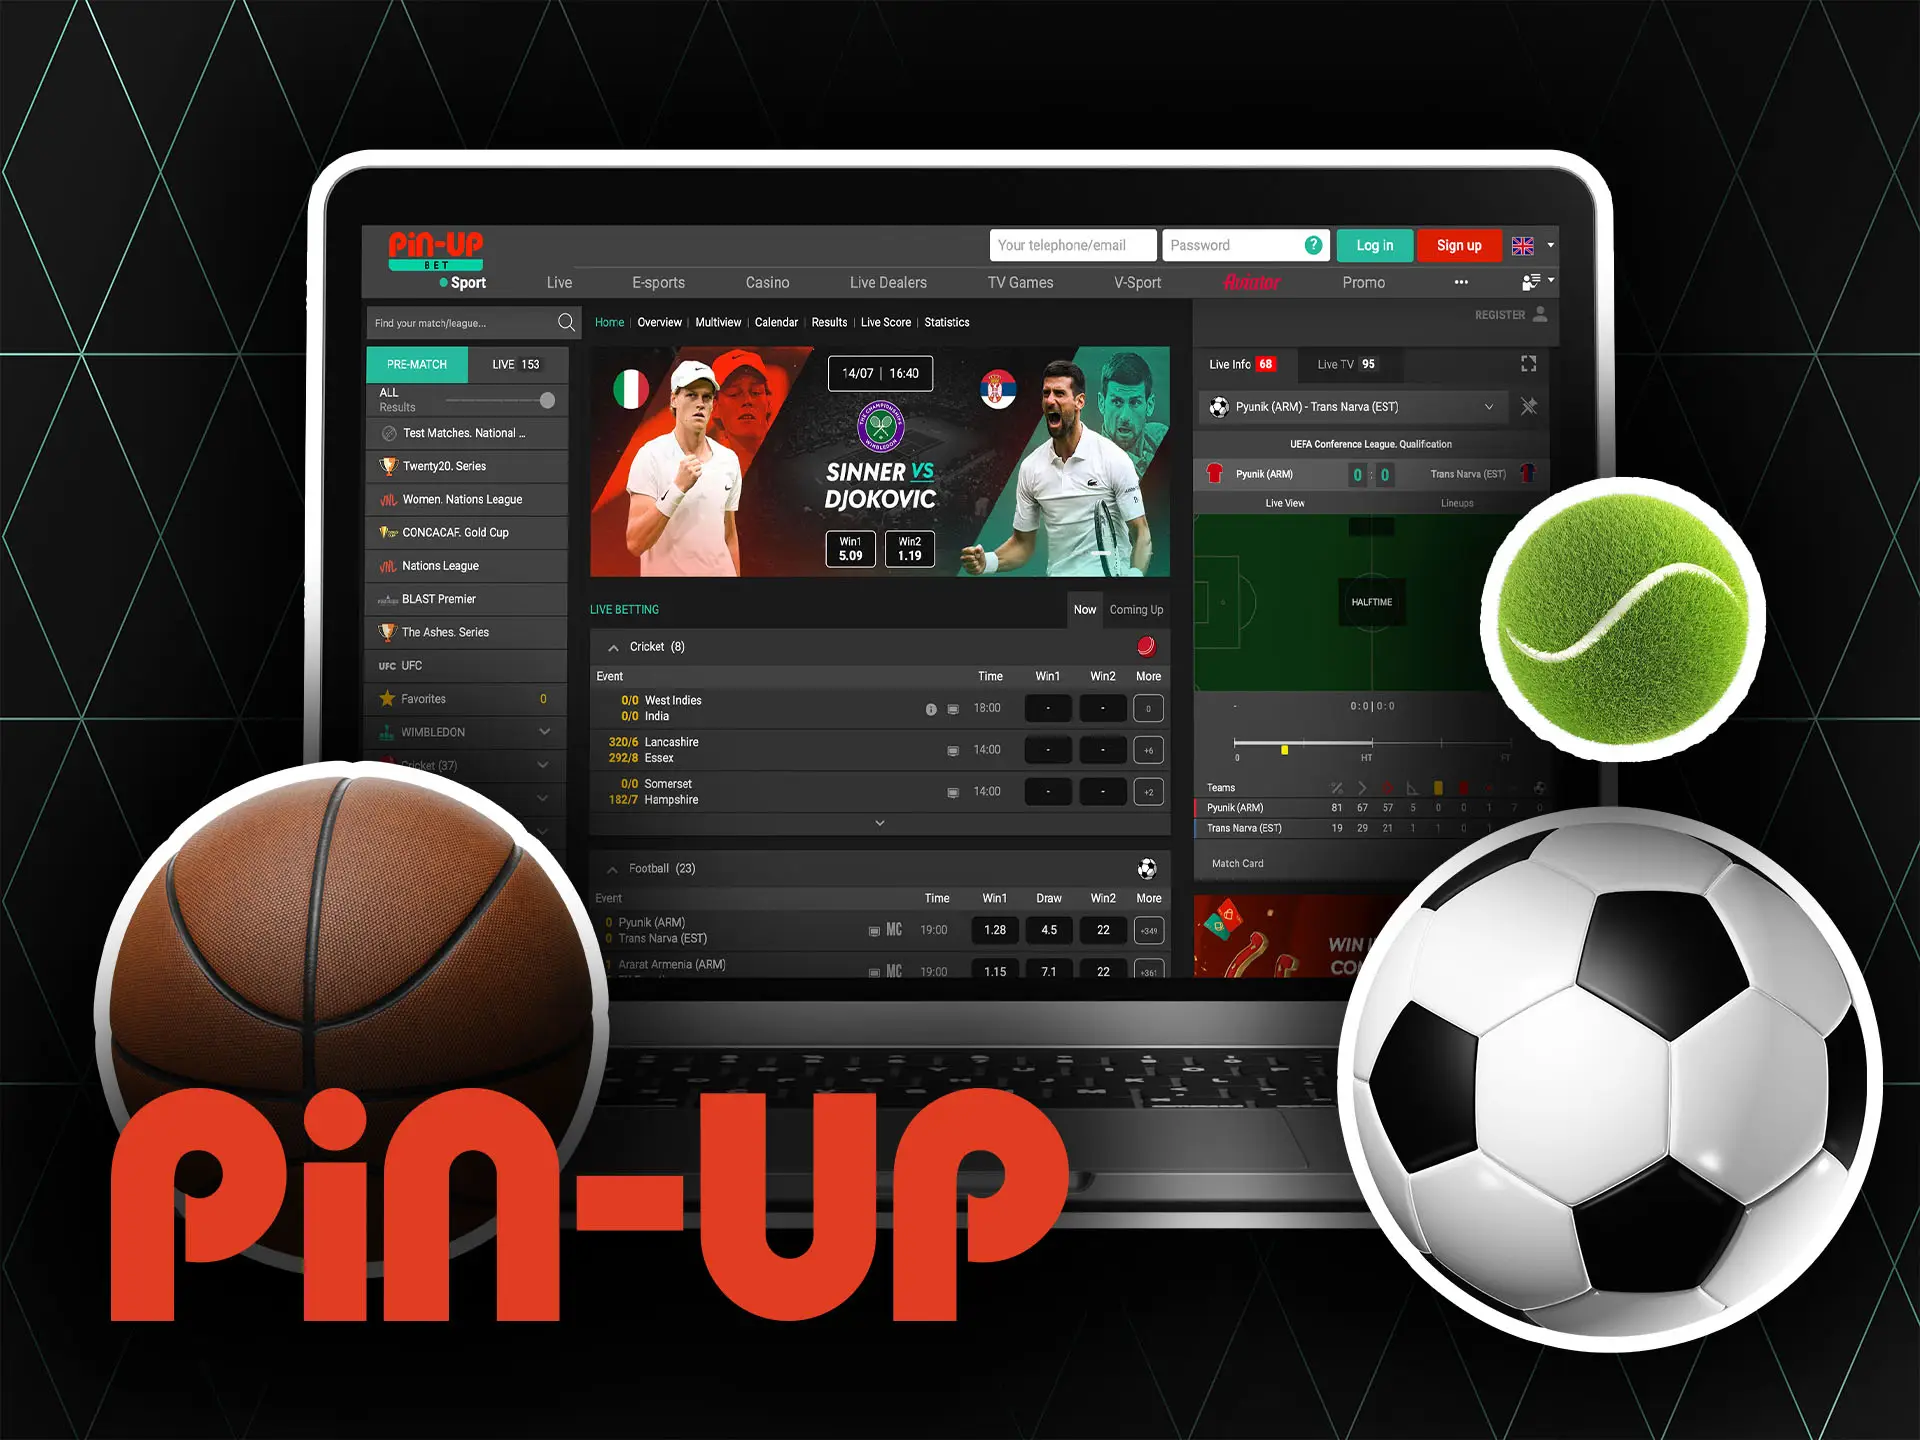 You can also place bets on other different sports, such as football, tennis, basketball and other.